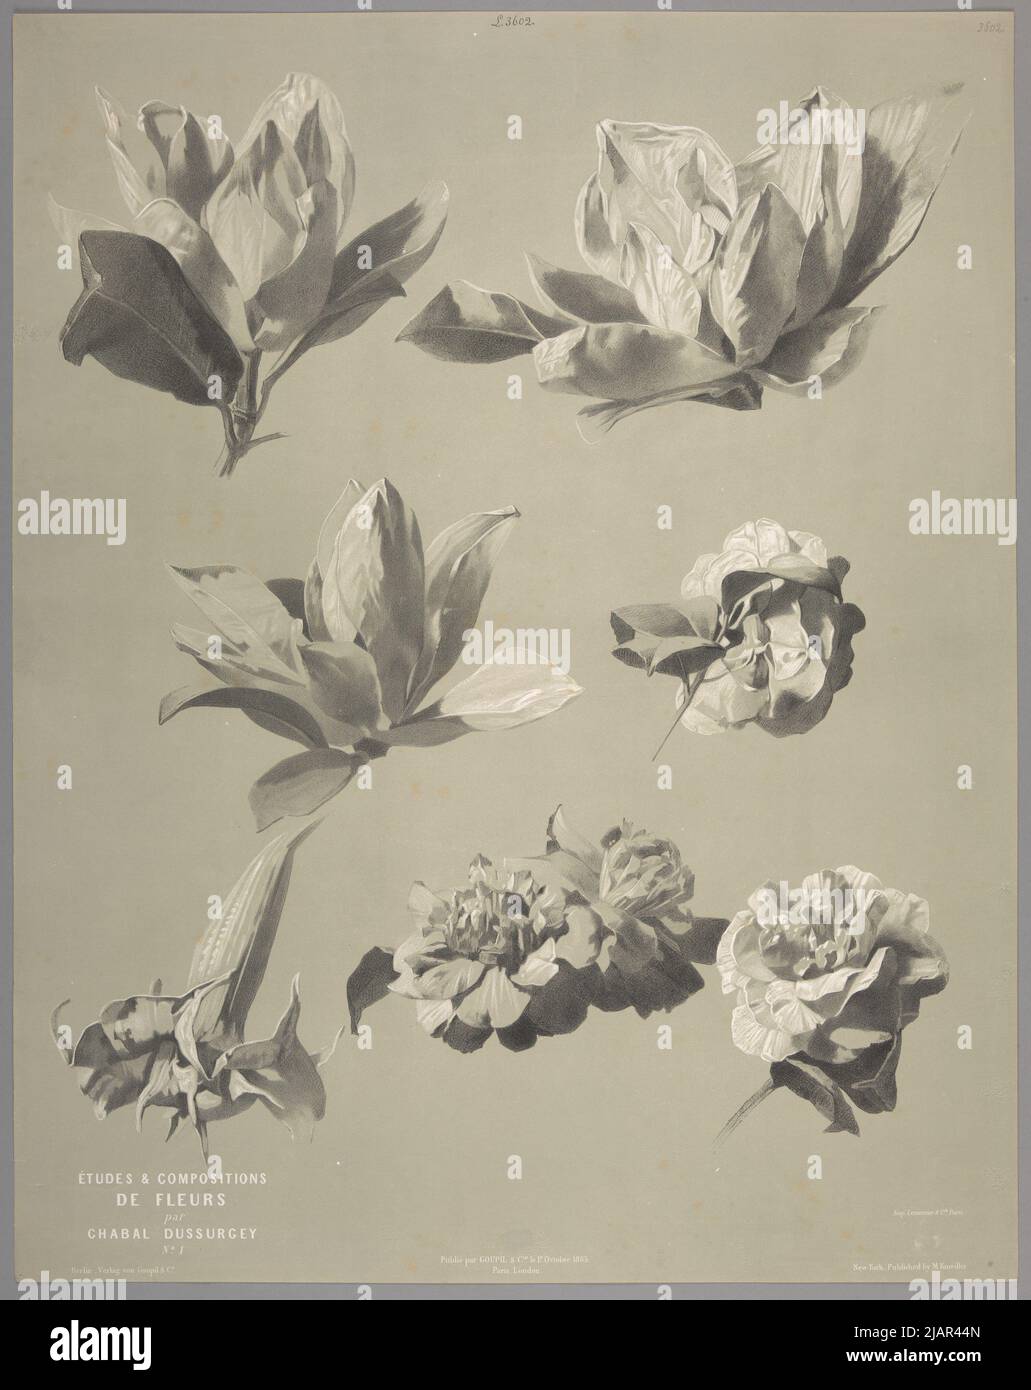 [Seven Rhododendron Flower Studies]  Pl. 1. From the Series Studies & Flowers compositions by Chabal Dussurgey, Paris London Berlin New York, 1859/1865, Lit. Lemercier & Cie, ed. Goupil & Cie Chabal Dussurgey, Pierre Adrien (1819 1902), W A C. Pierre Adrien Chabal, imp. Lemercier & Cie, Goupil & Cie, Knoedler, Michael (1823 1878) Stock Photo